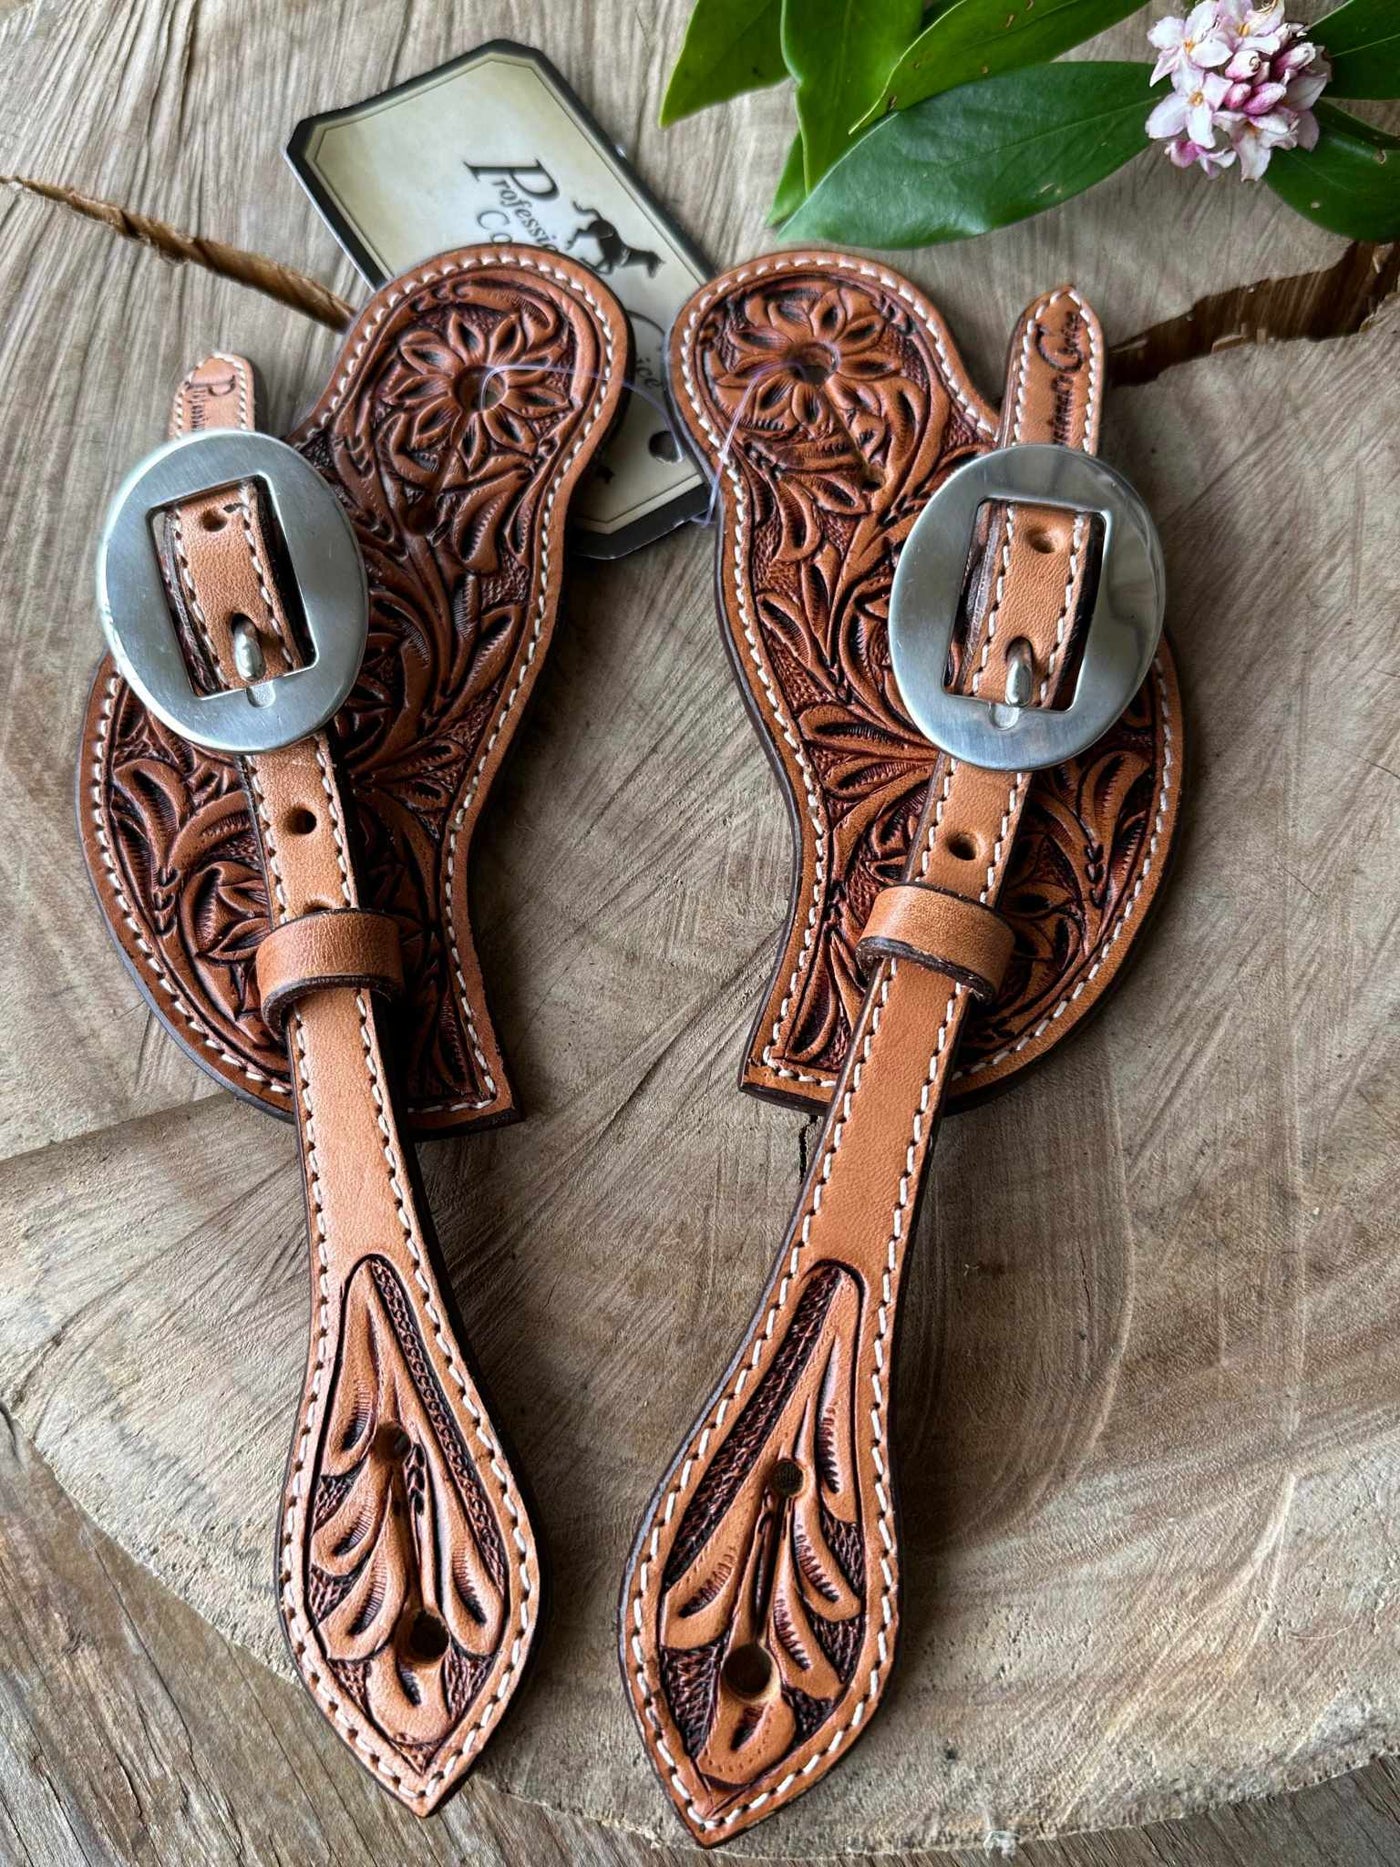 Strap -  Pro Choice Buckaroo Tooled Leather Spur Straps